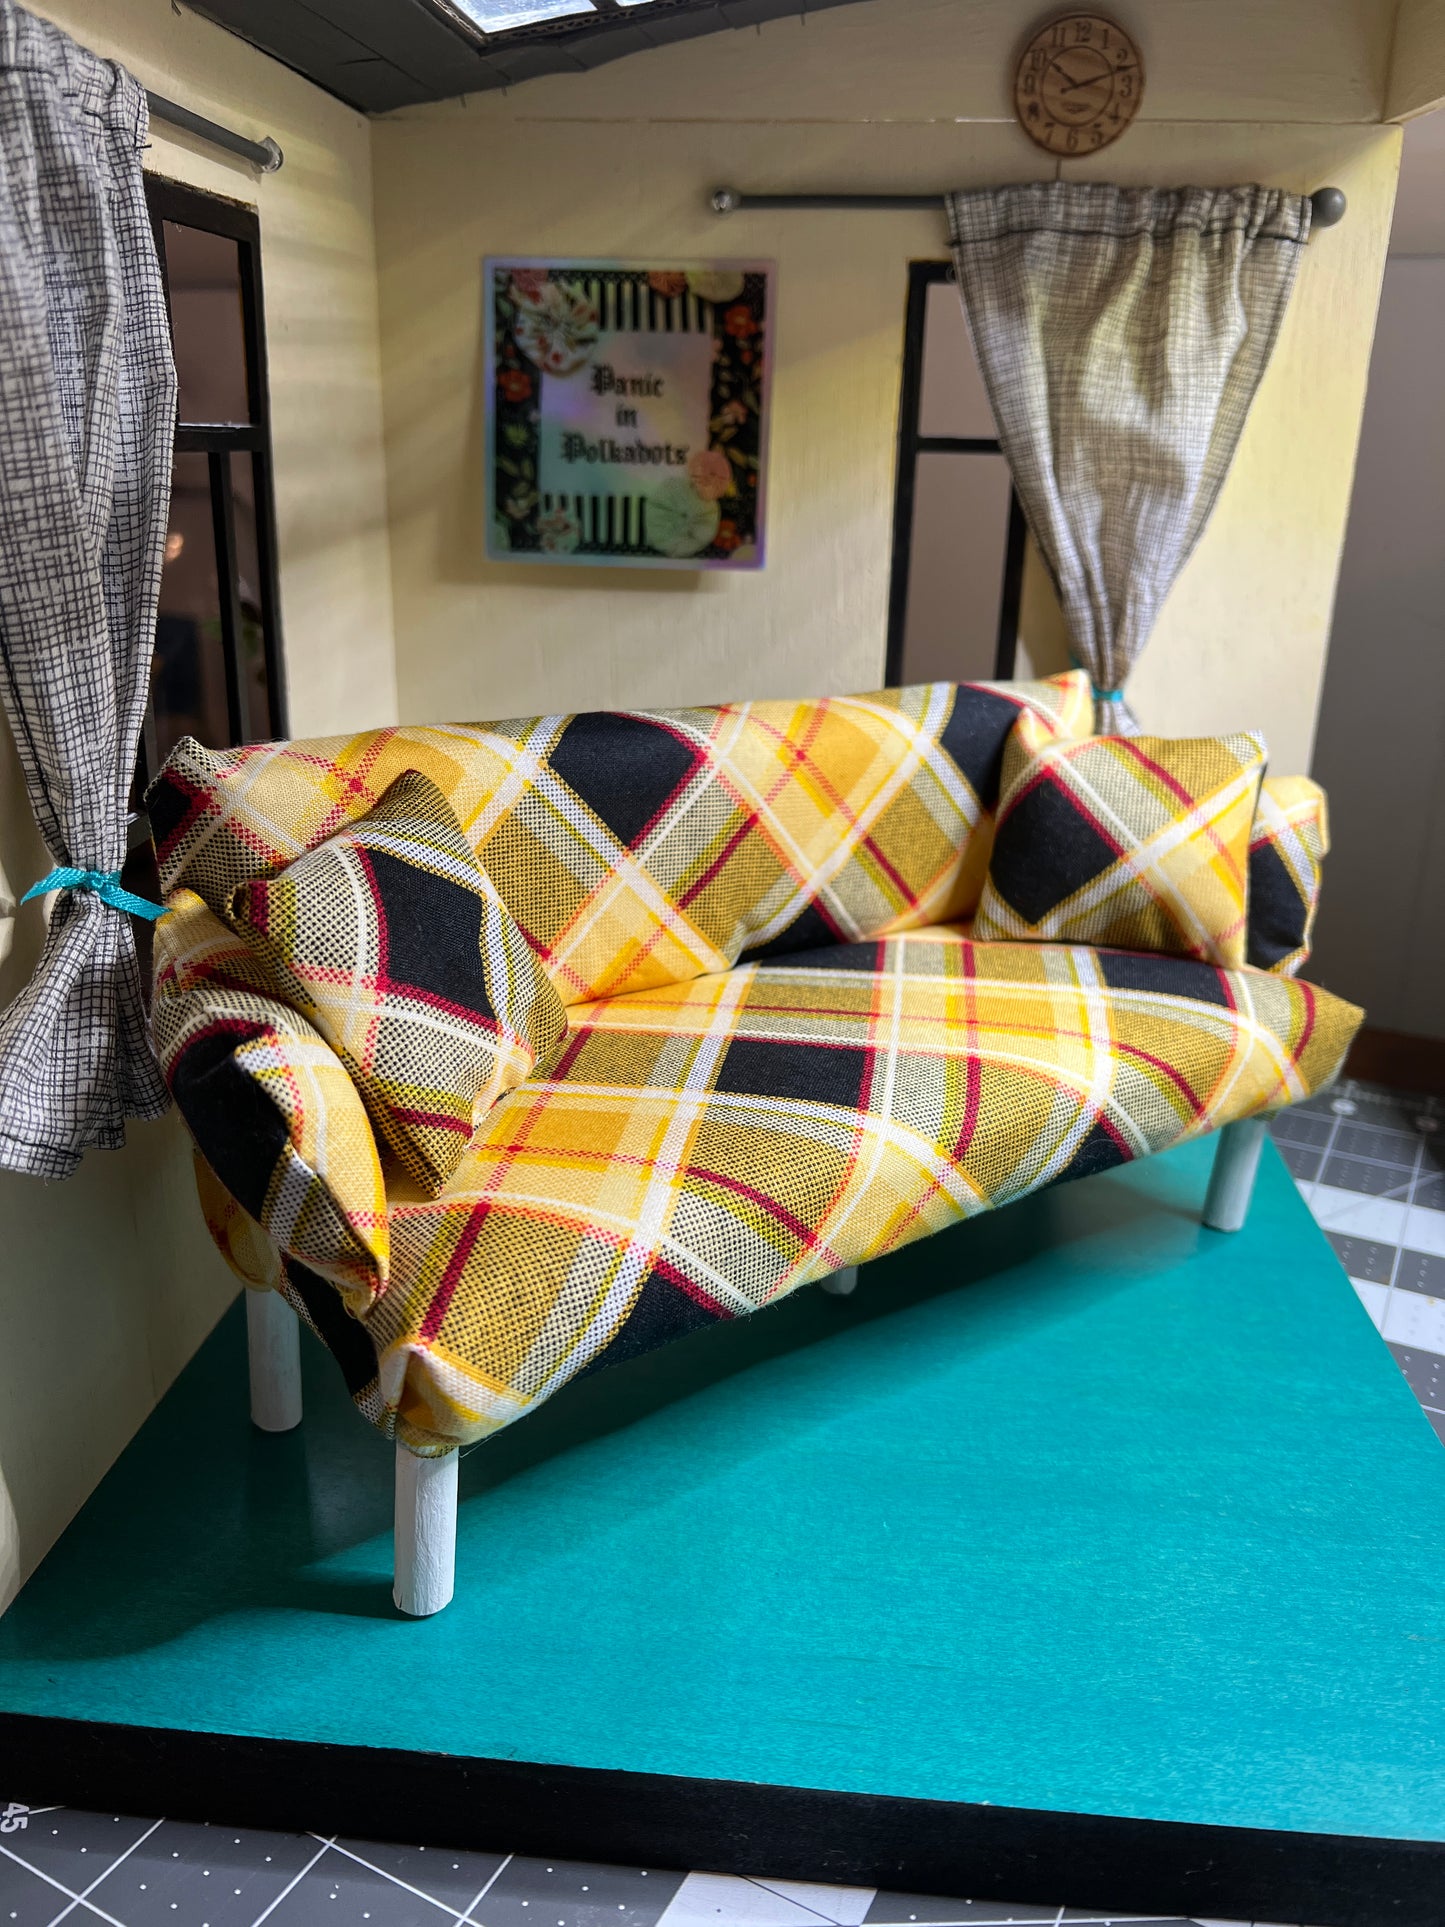 handmade Barbie doll couch, in a dollhouse setting for scale, includes two pillows by Panic in Polkadots. Bright plaid fabric in yellow, with red, white and black